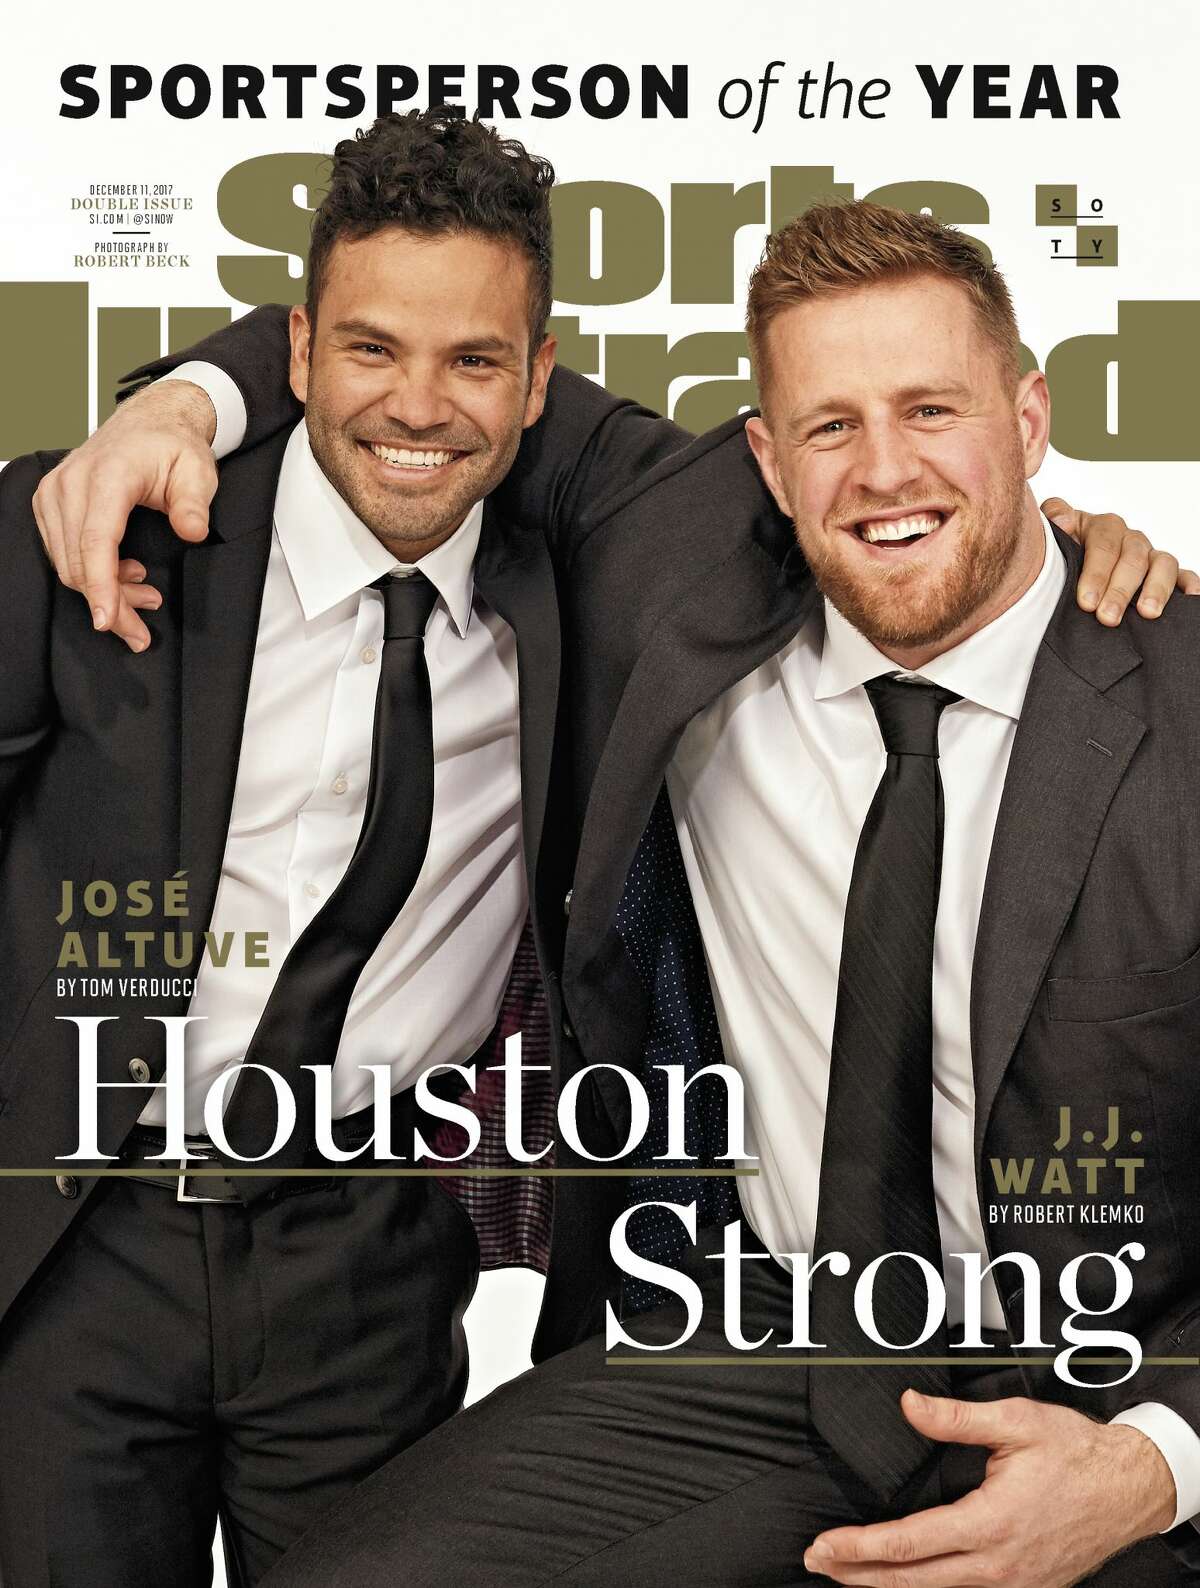 PHOTOS: Sports Illustrated Sportsperson of the Year through the years and Watt's appearance on NBC's "The Tonight Show Starring Jimmy Fallon" on Monday night. Sports Illustrated has named the Astros' J.J. Watt and the Texans' J.J. Watt as Sportspersons of the Year for 2017. The magazine will hit newsstands later this month. Browse through the photos for a look at the Sports Illustrated covers for their Sportsperson of the Year issue each year and Watt's appearance on NBC's "The Tonight Show Starring Jimmy Fallon" on Monday night.